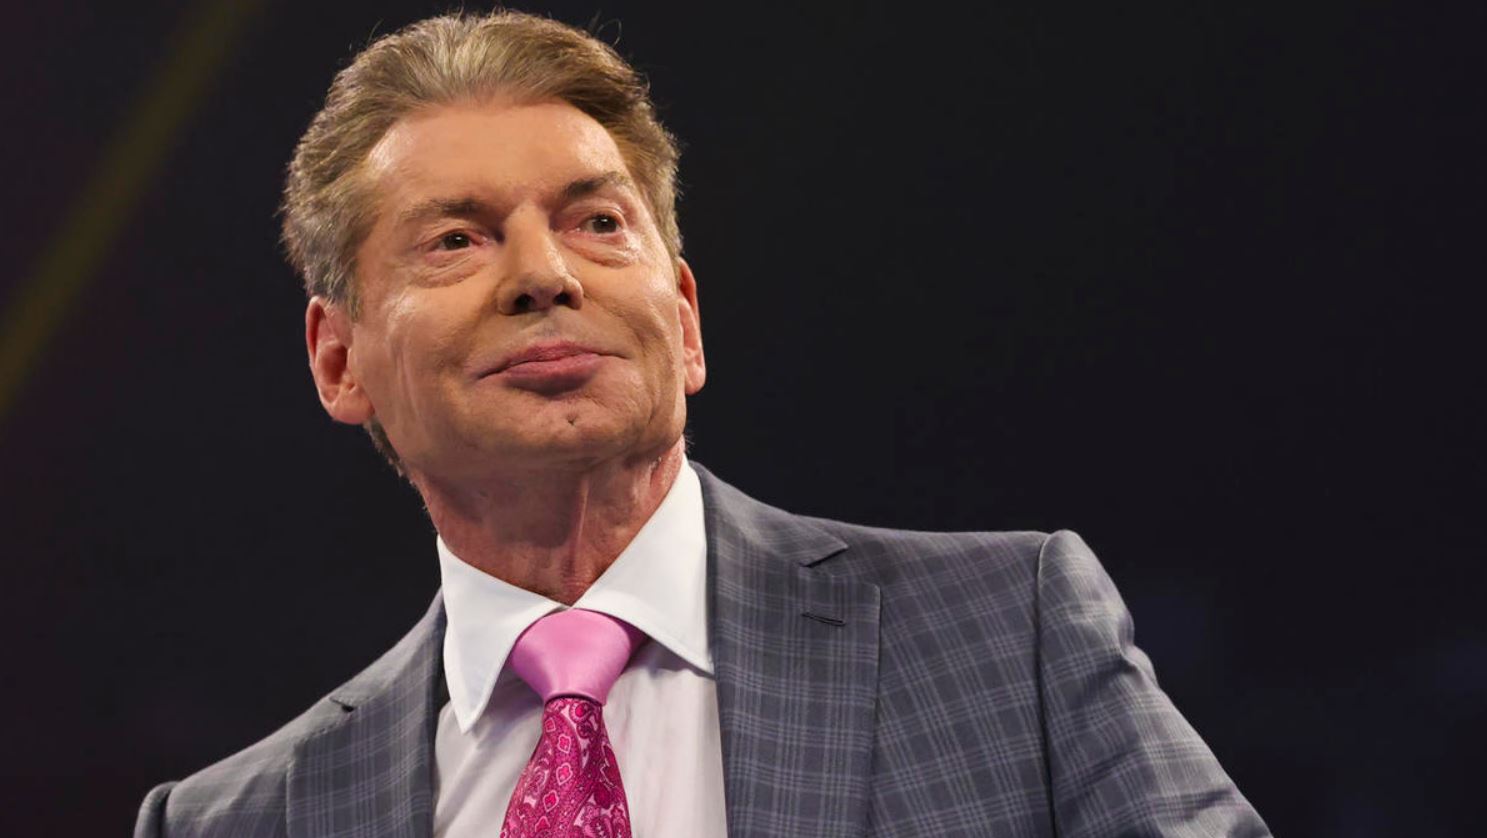 The McMahon Legacy: Evaluating WWE's Creative Shifts